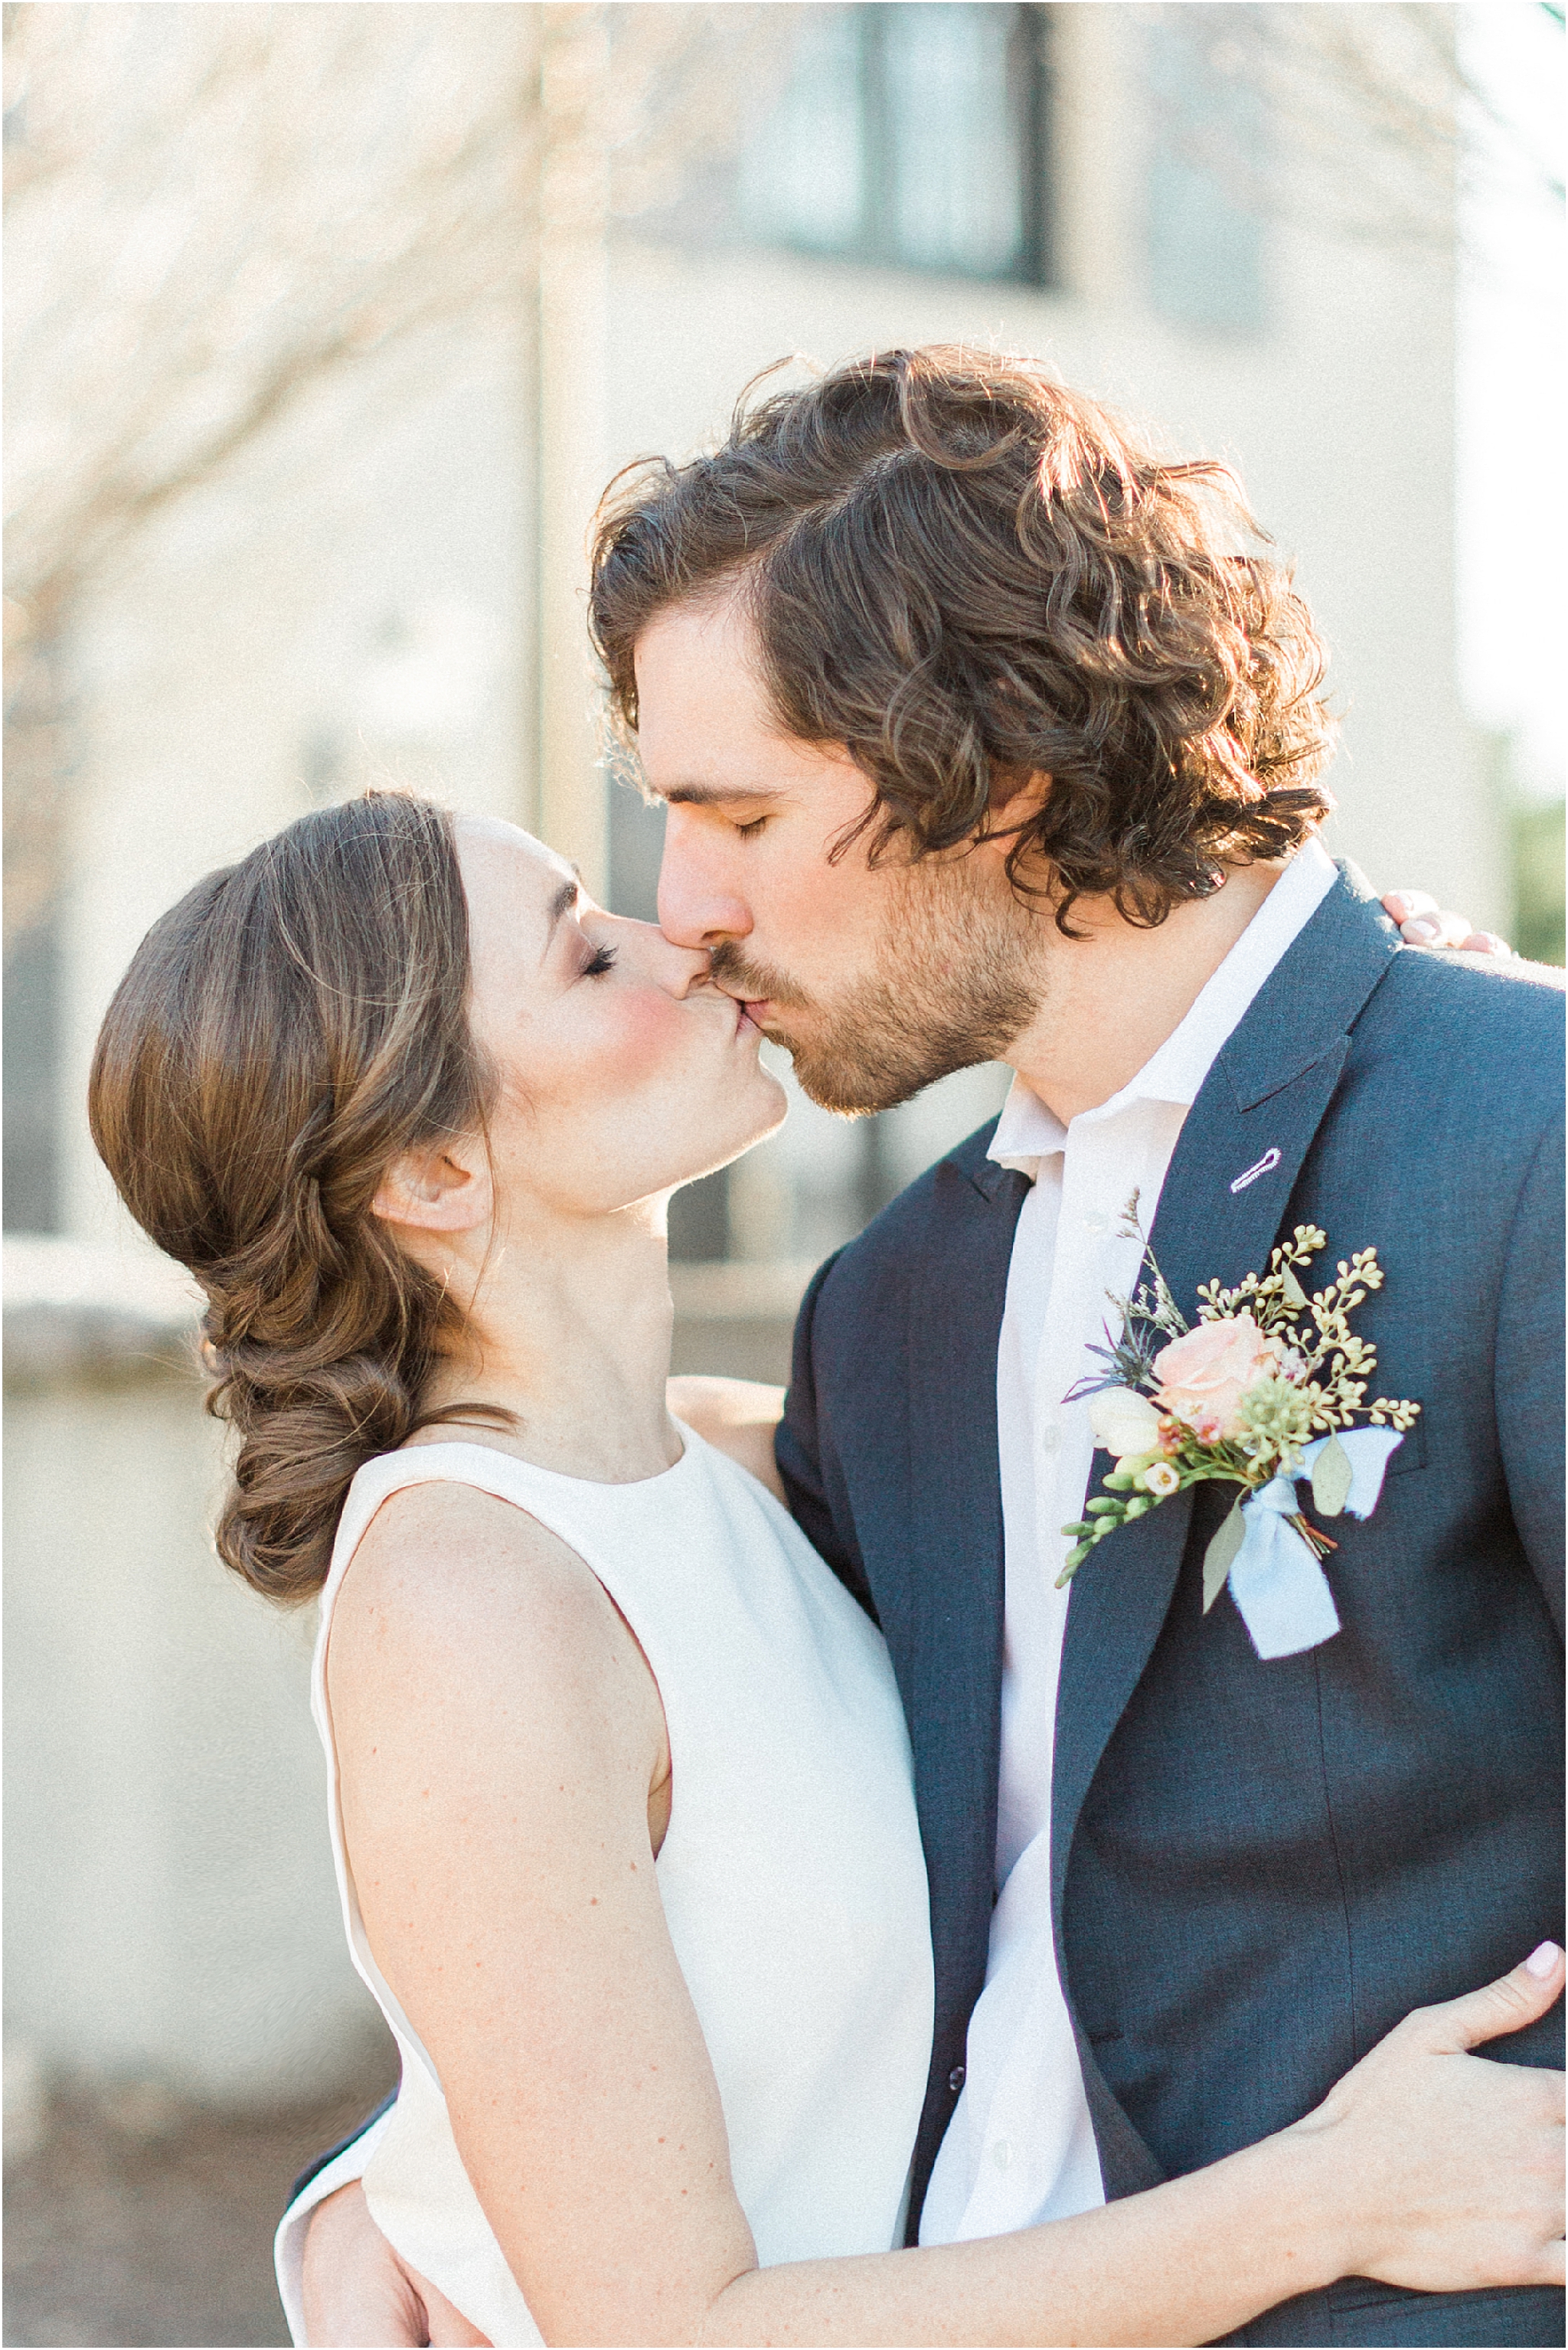 Intimate wedding elopement at Hotel Domestique by Austin & Rachel Photography